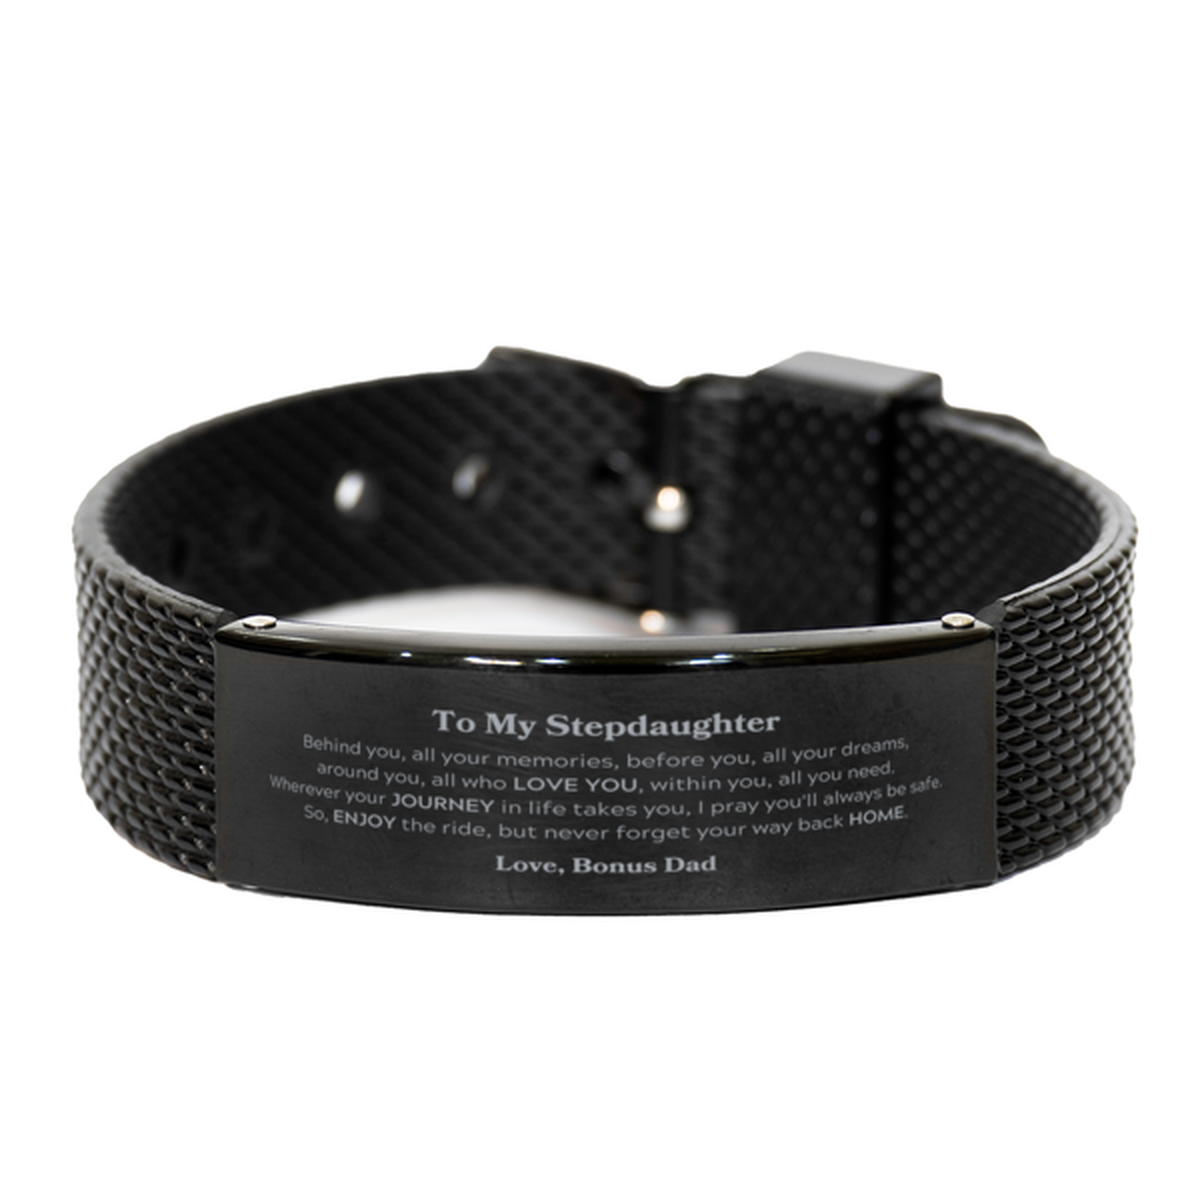 To My Stepdaughter Graduation Gifts from Bonus Dad, Stepdaughter Black Shark Mesh Bracelet Christmas Birthday Gifts for Stepdaughter Behind you, all your memories, before you, all your dreams. Love, Bonus Dad